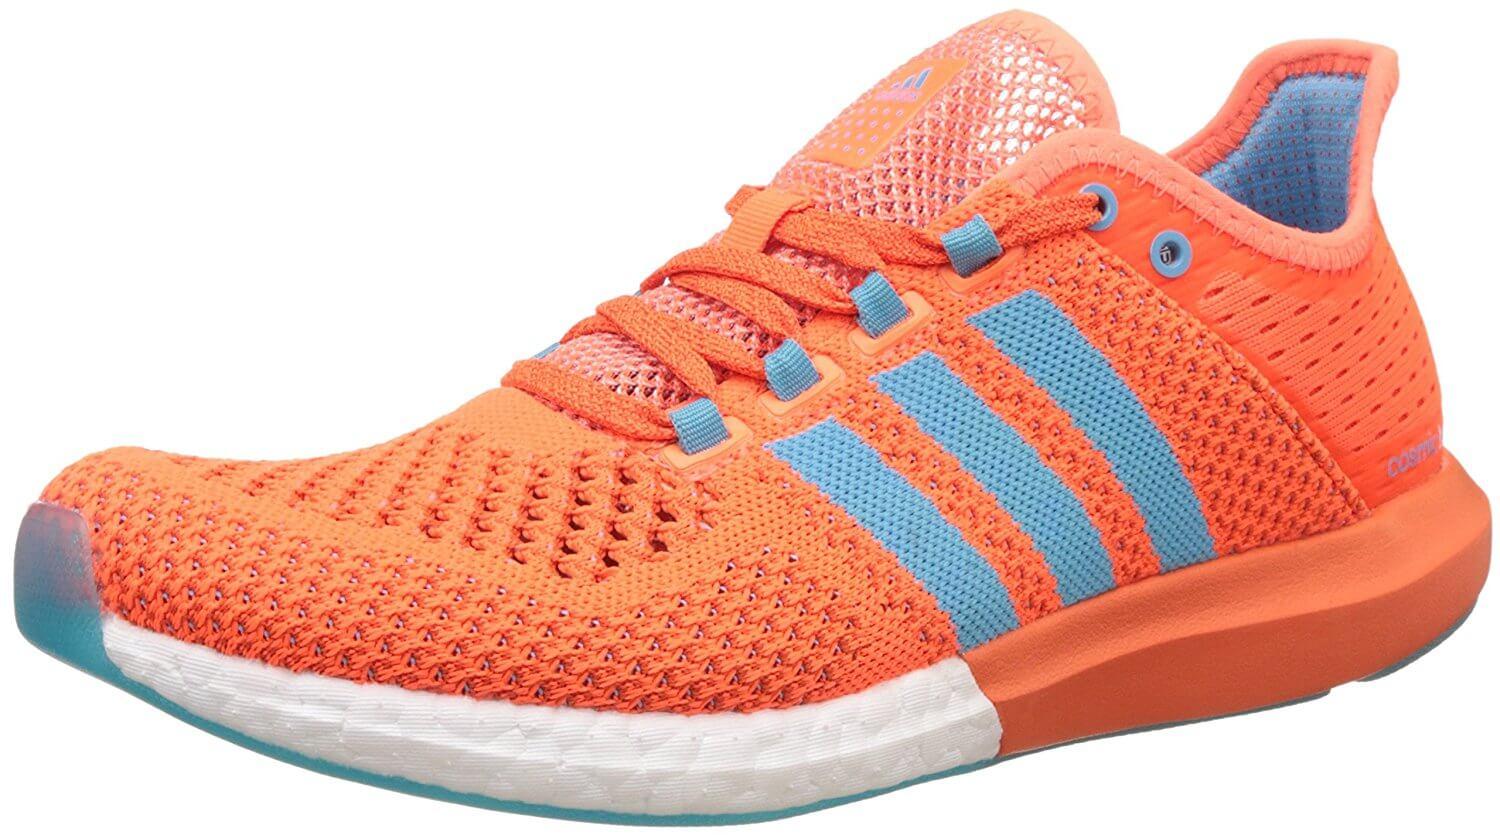 Adidas Climachill Cosmic Boost 1